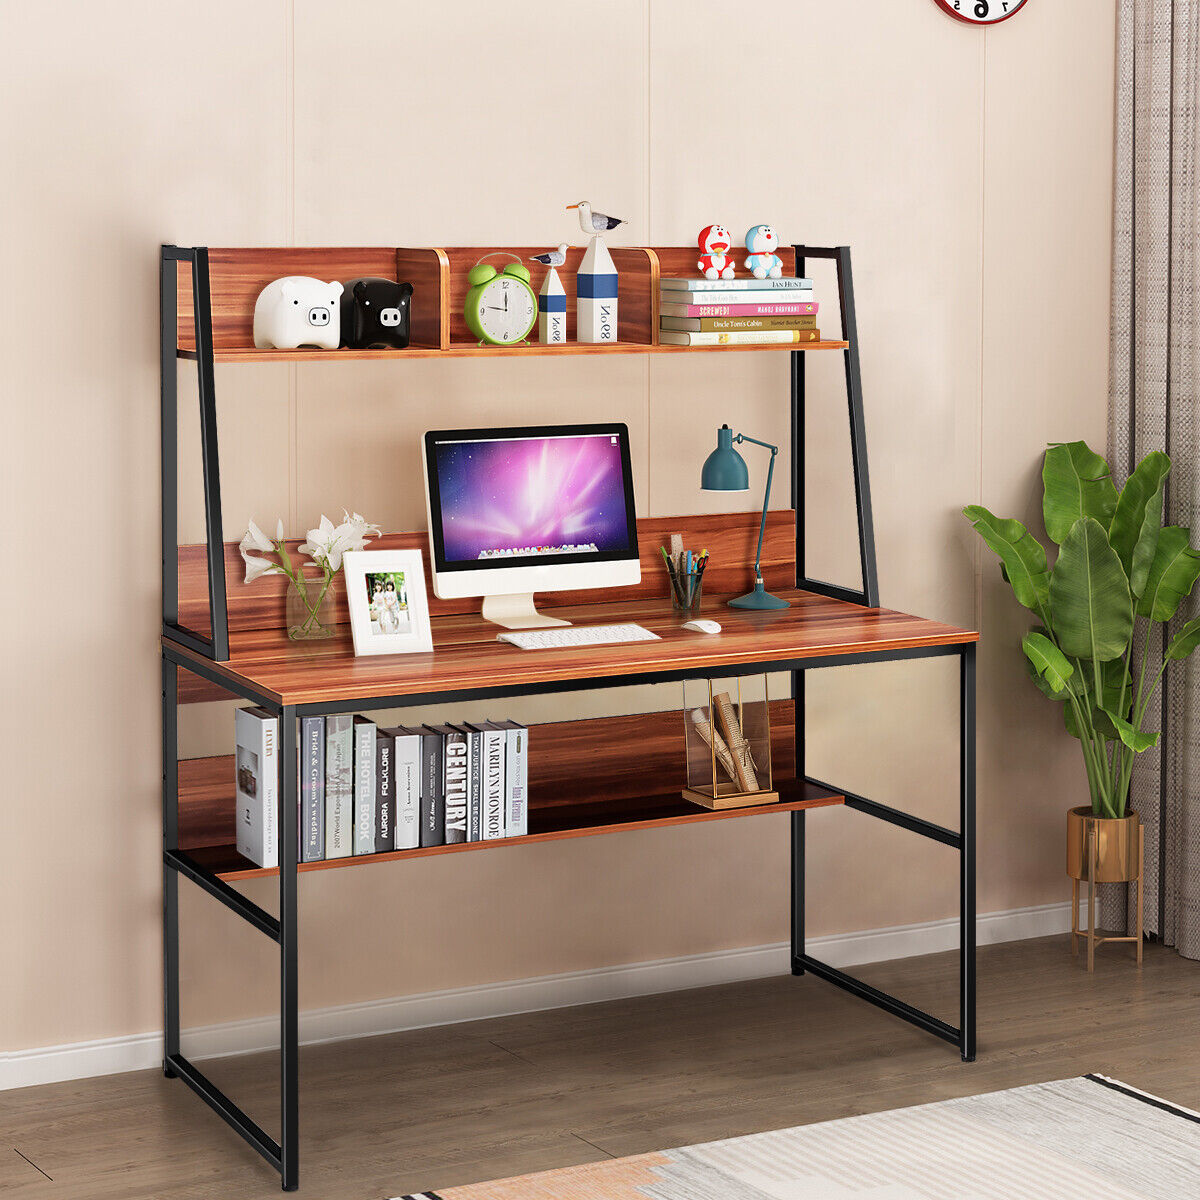 47" Computer Desk with Hutch & Bookshelf Workstation for Writing and Study